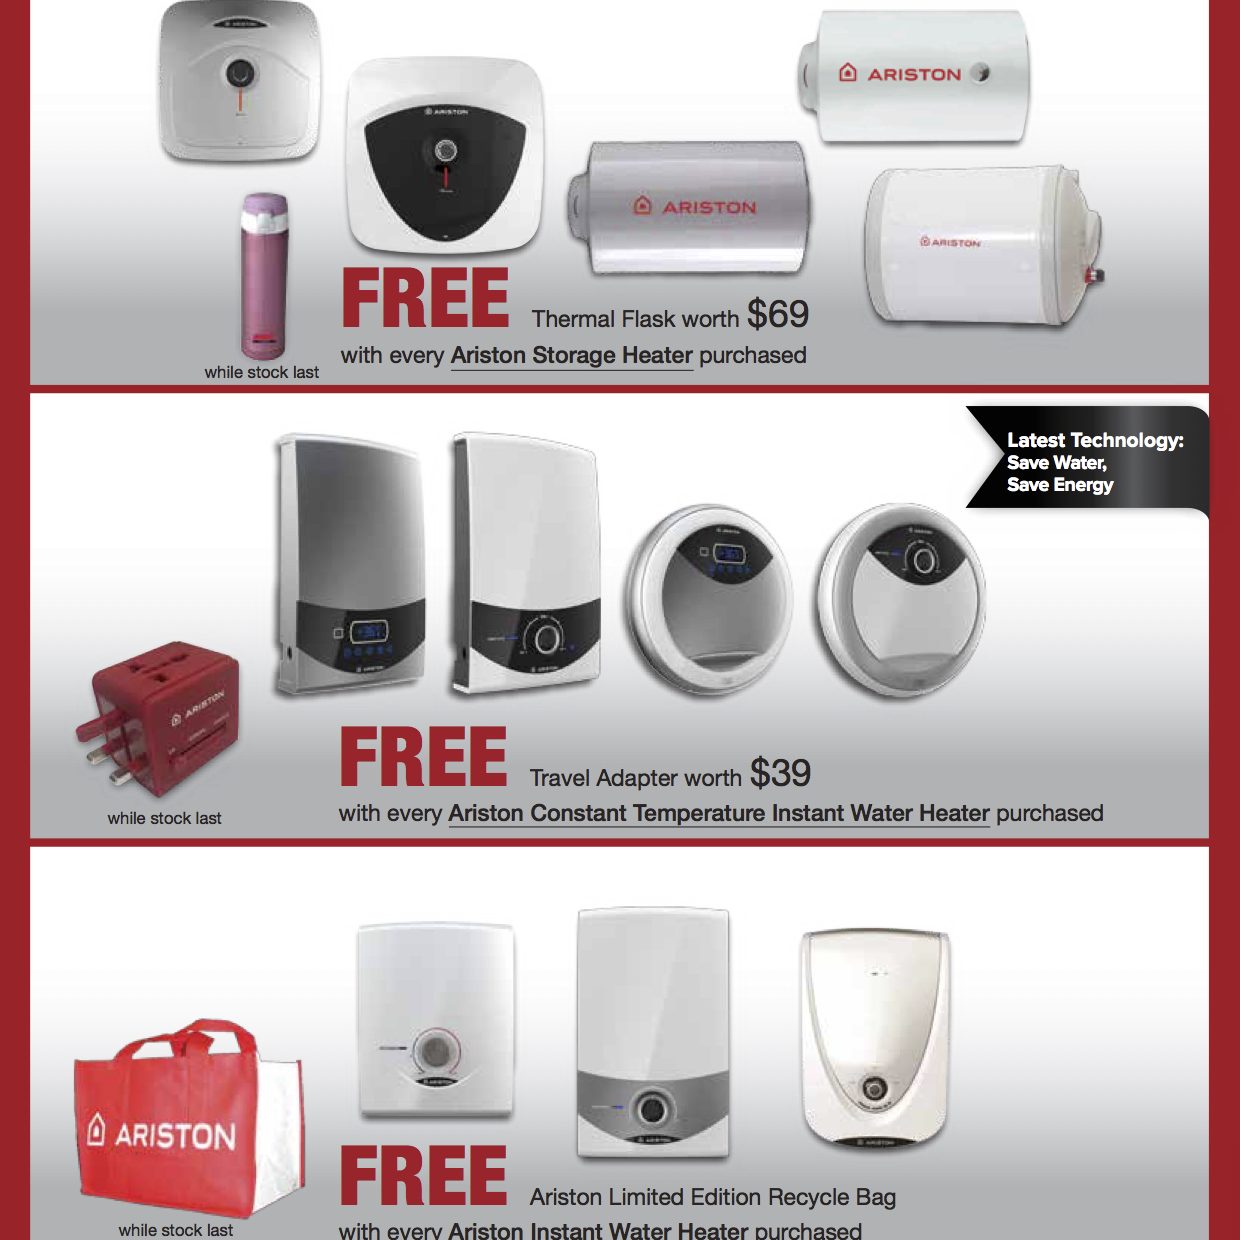 Ariston Mid Year Promo happening from 13 May to 30 June 2016